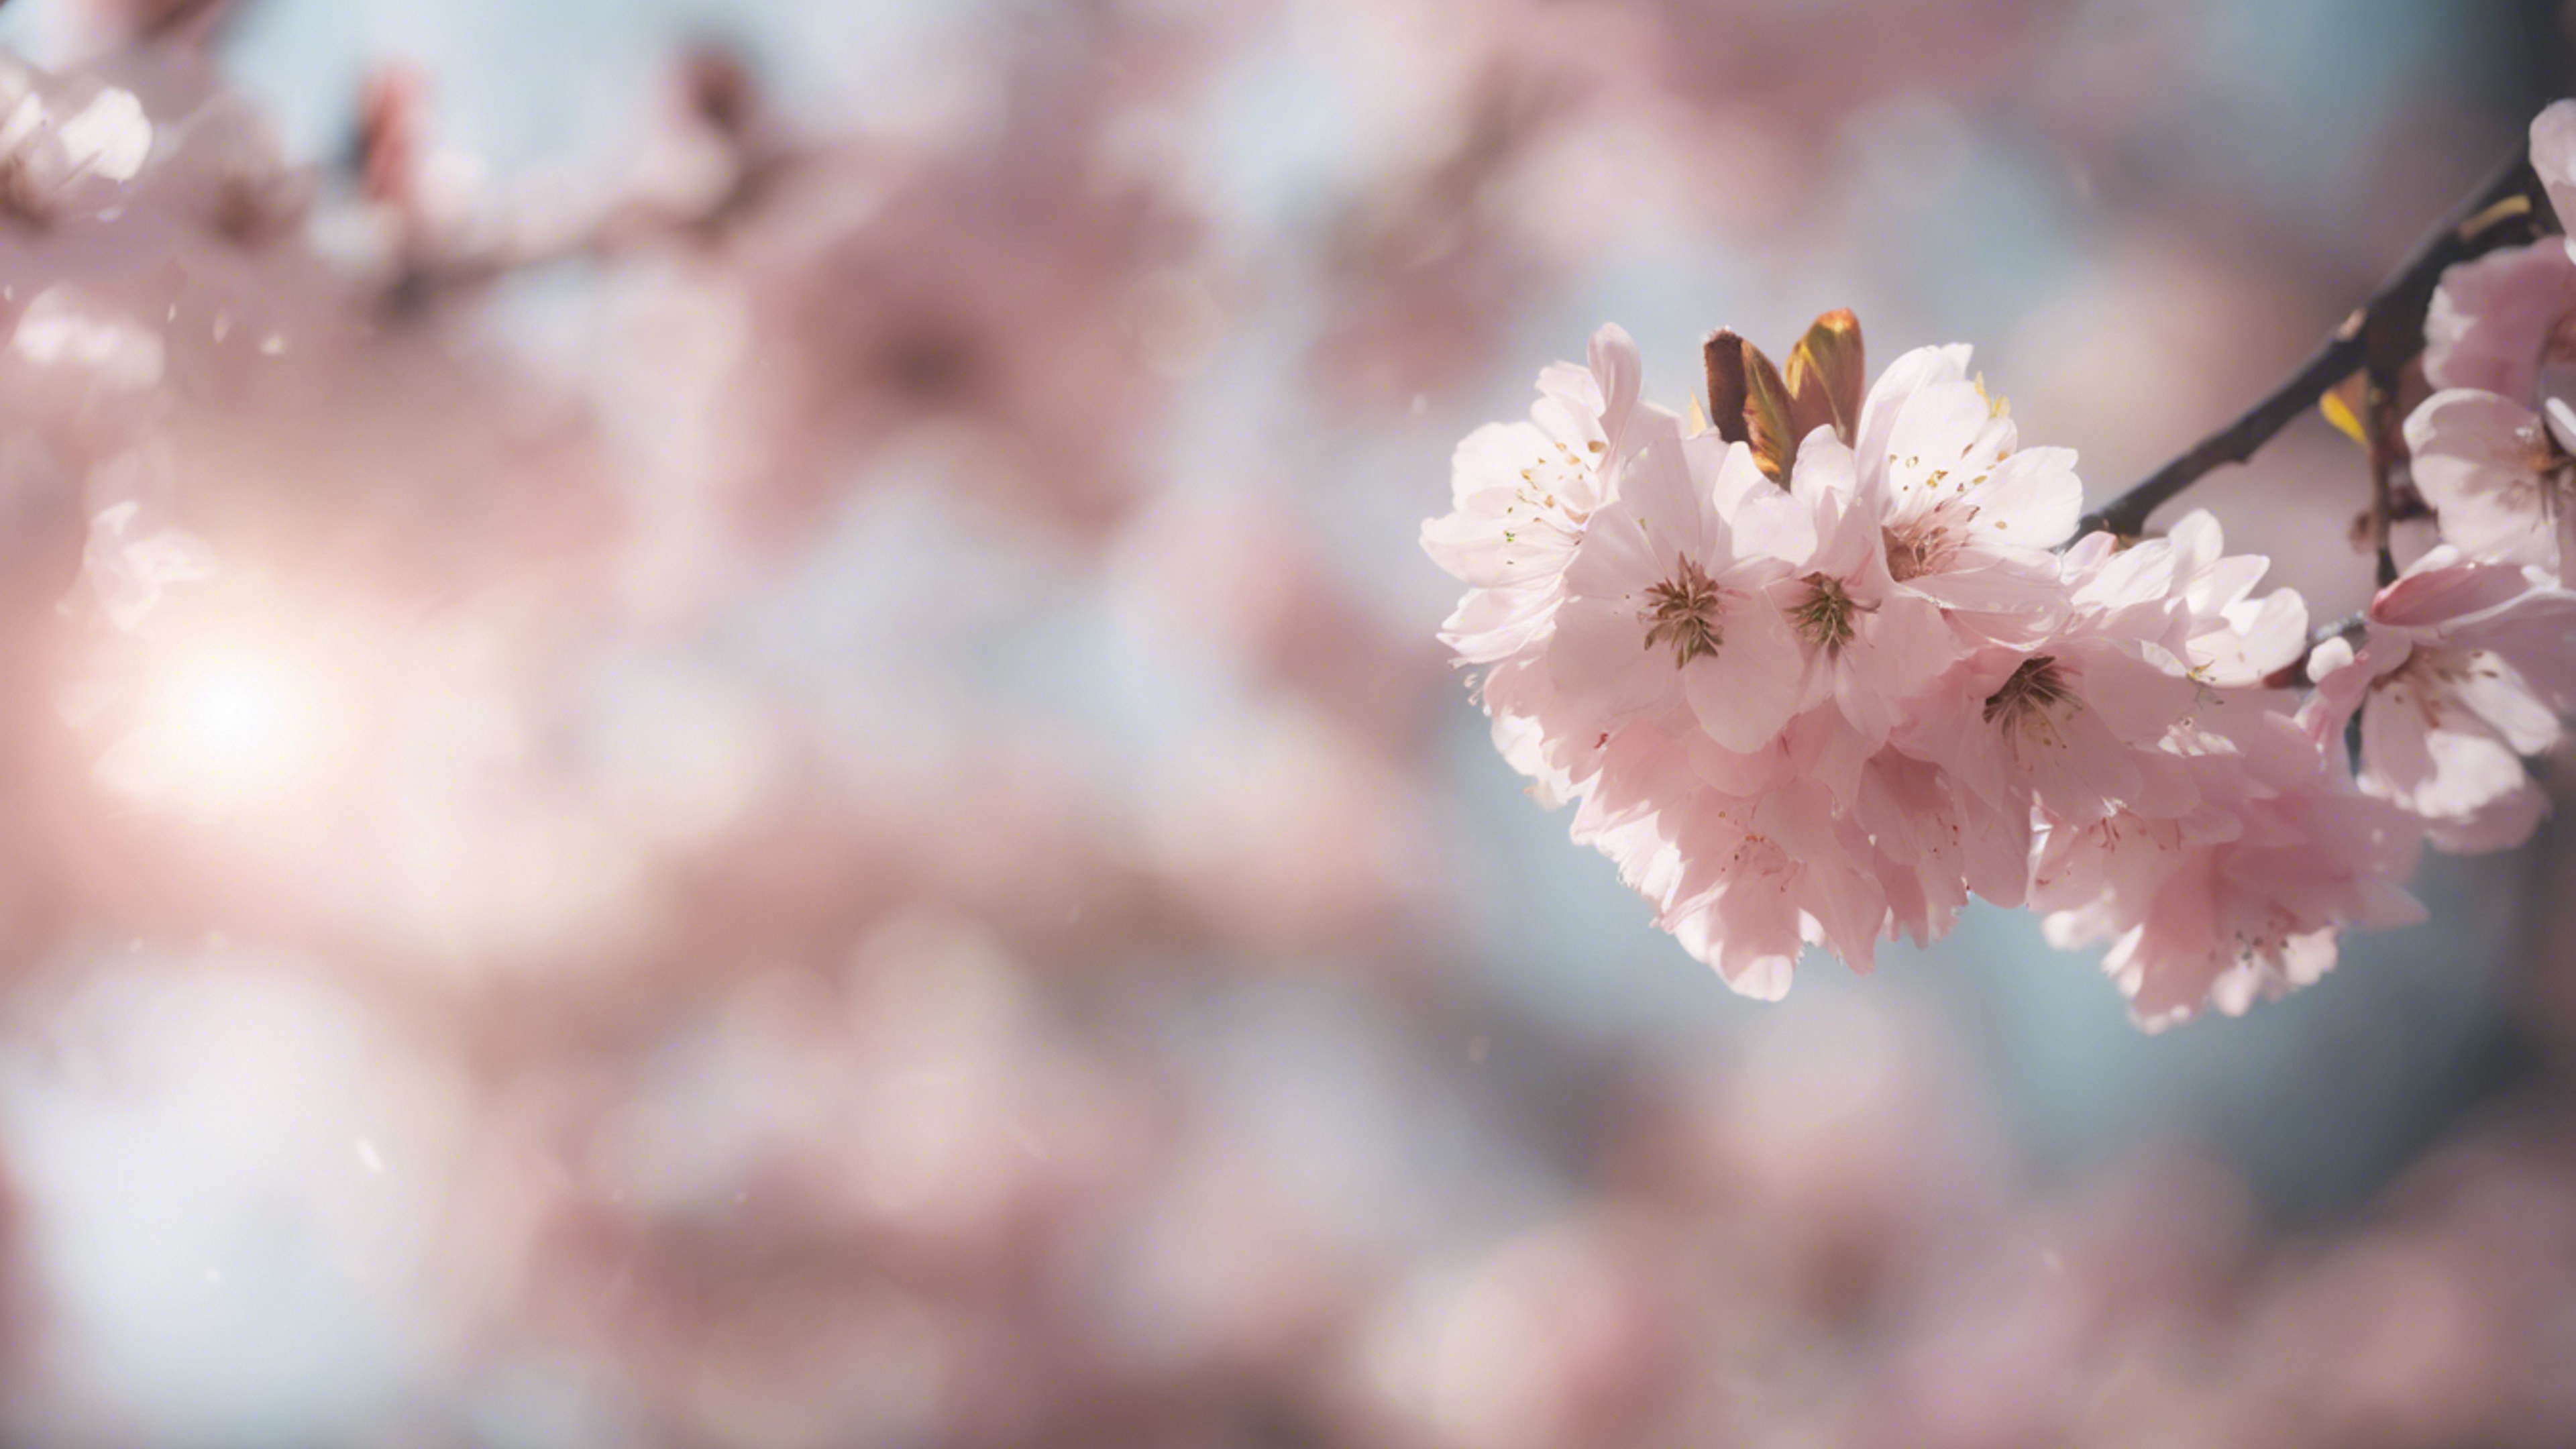 An ethereal dreamscape featuring cherry blossoms wafting in the soft spring breeze. Tapeta[9de2e4f1deeb467ebab6]